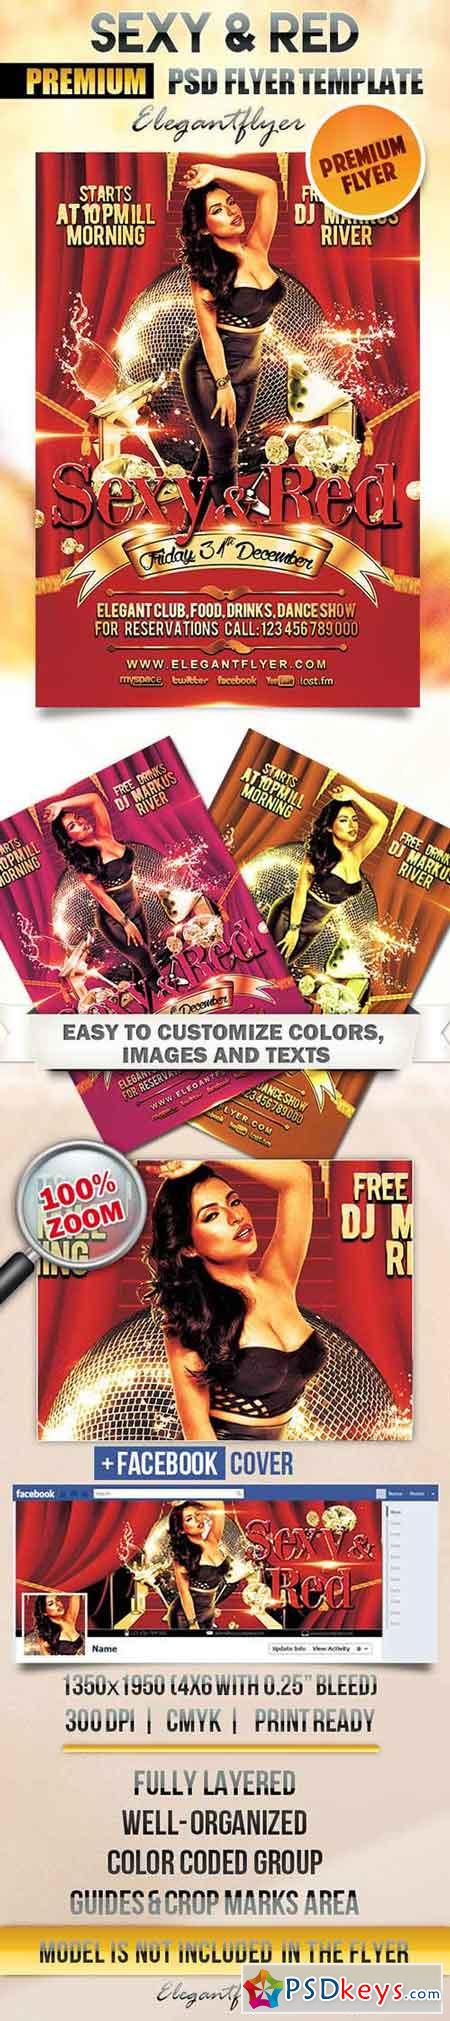 Sexy and Red Flyer PSD Template + Facebook Cover